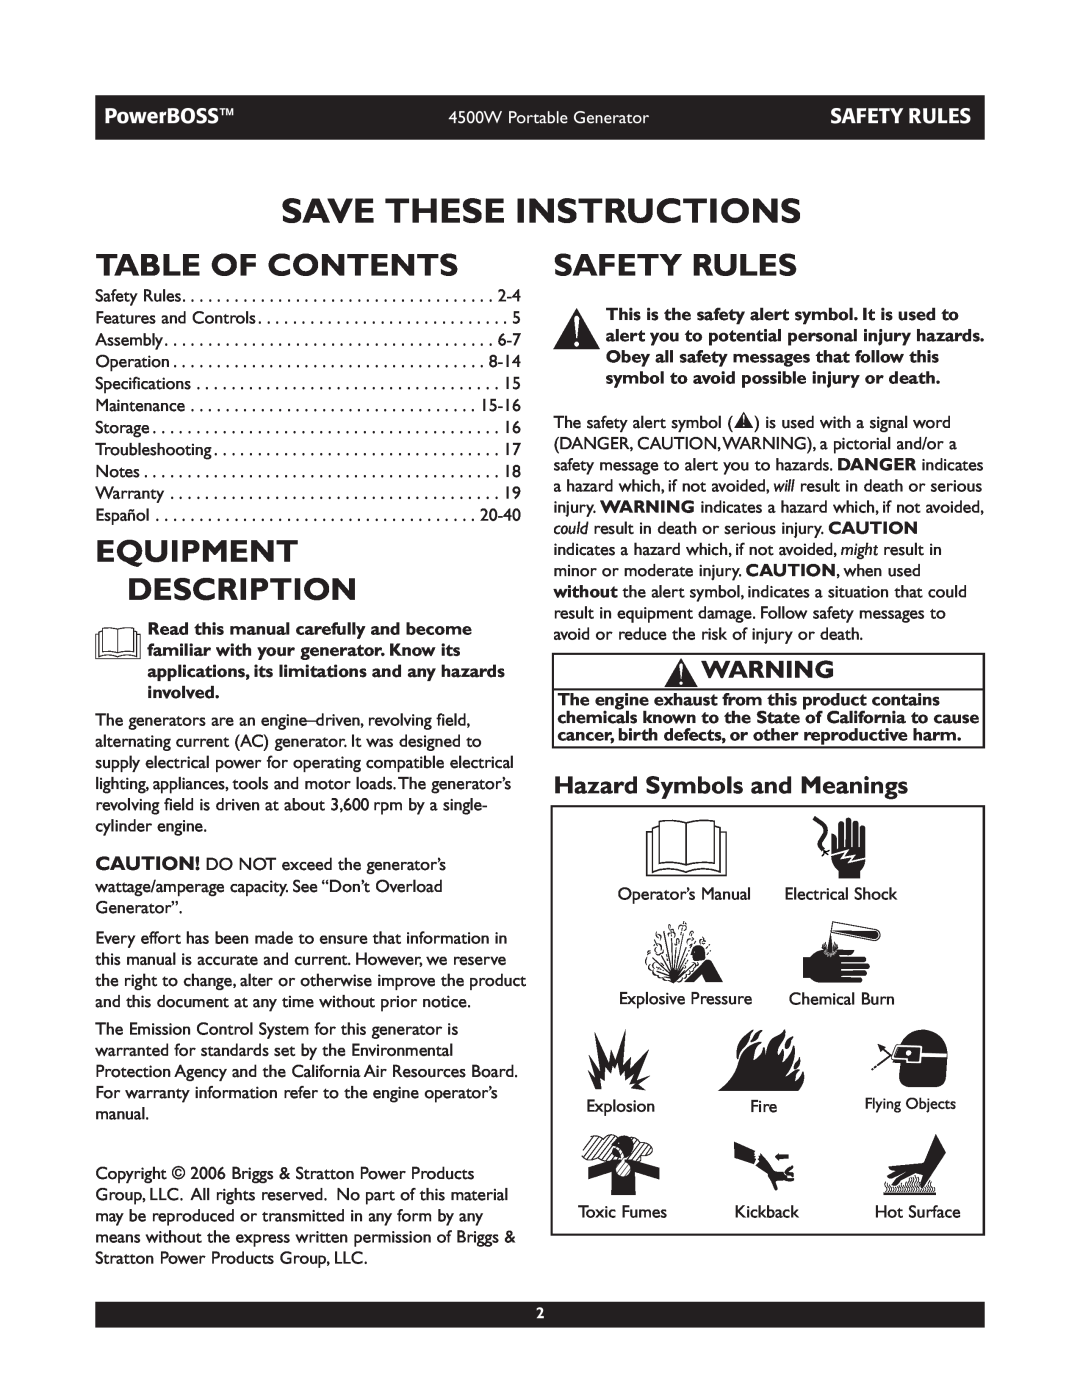 Briggs & Stratton 01648-1 Table Of Contents, Equipment Description, Safety Rules, Hazard Symbols and Meanings, PowerBOSS 